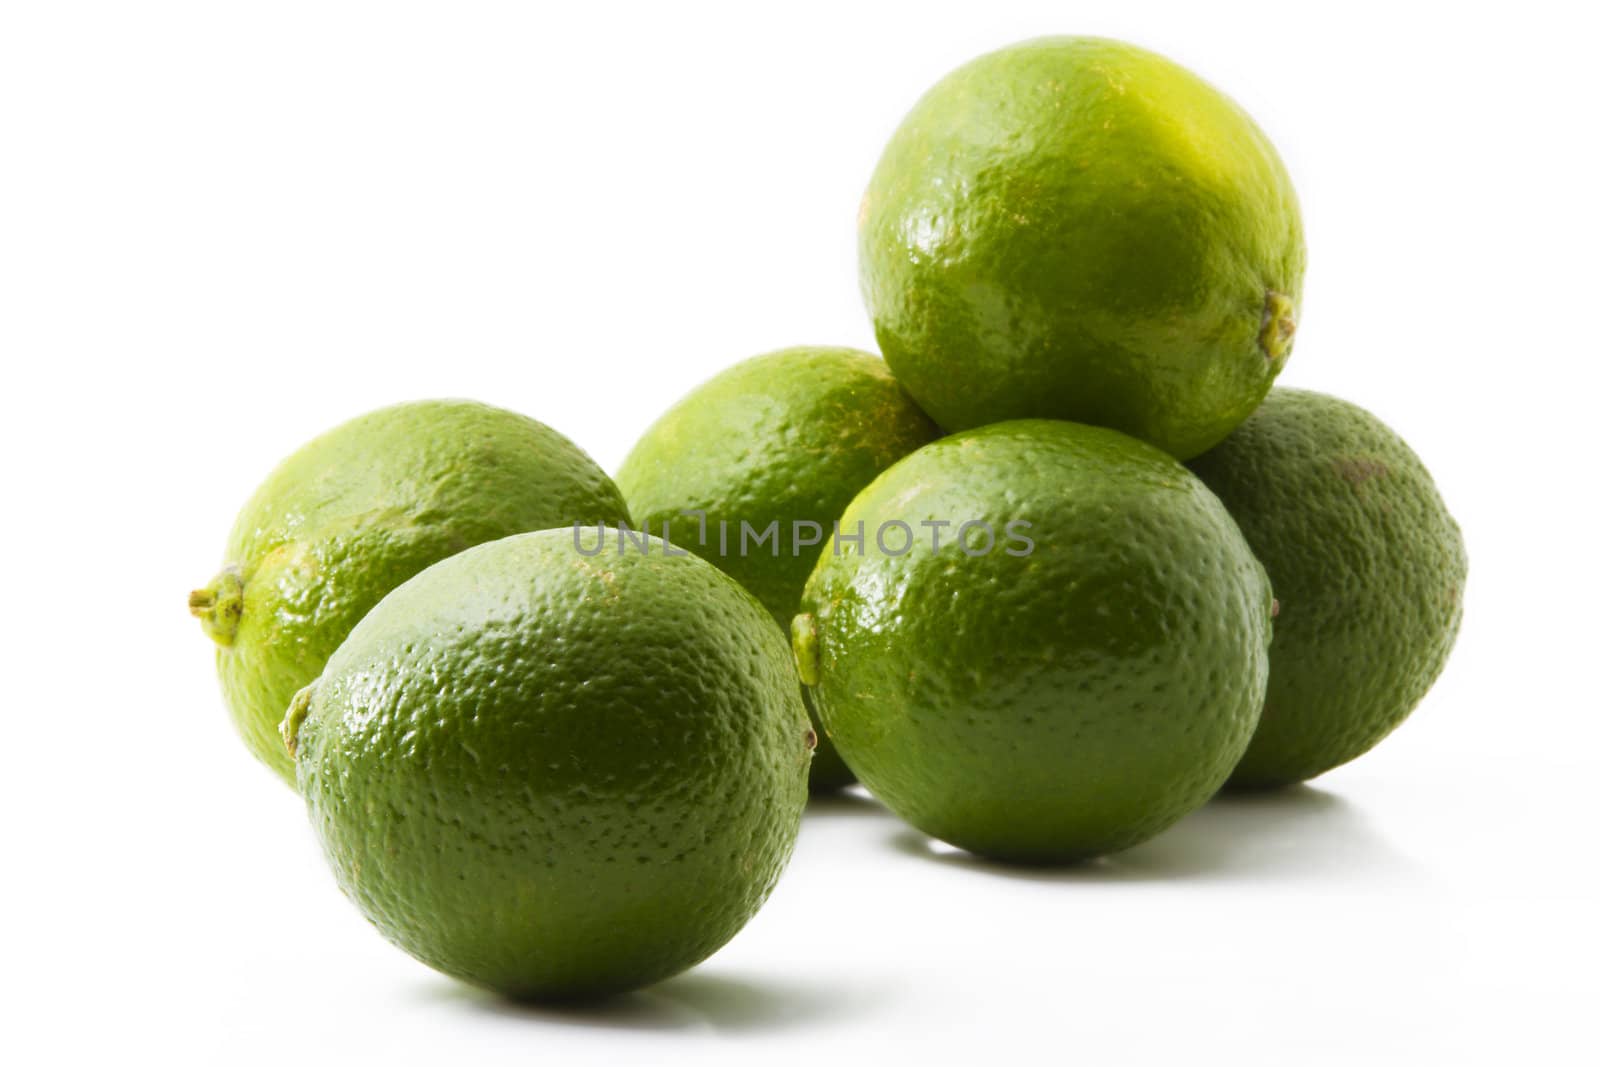 six green limes on white background